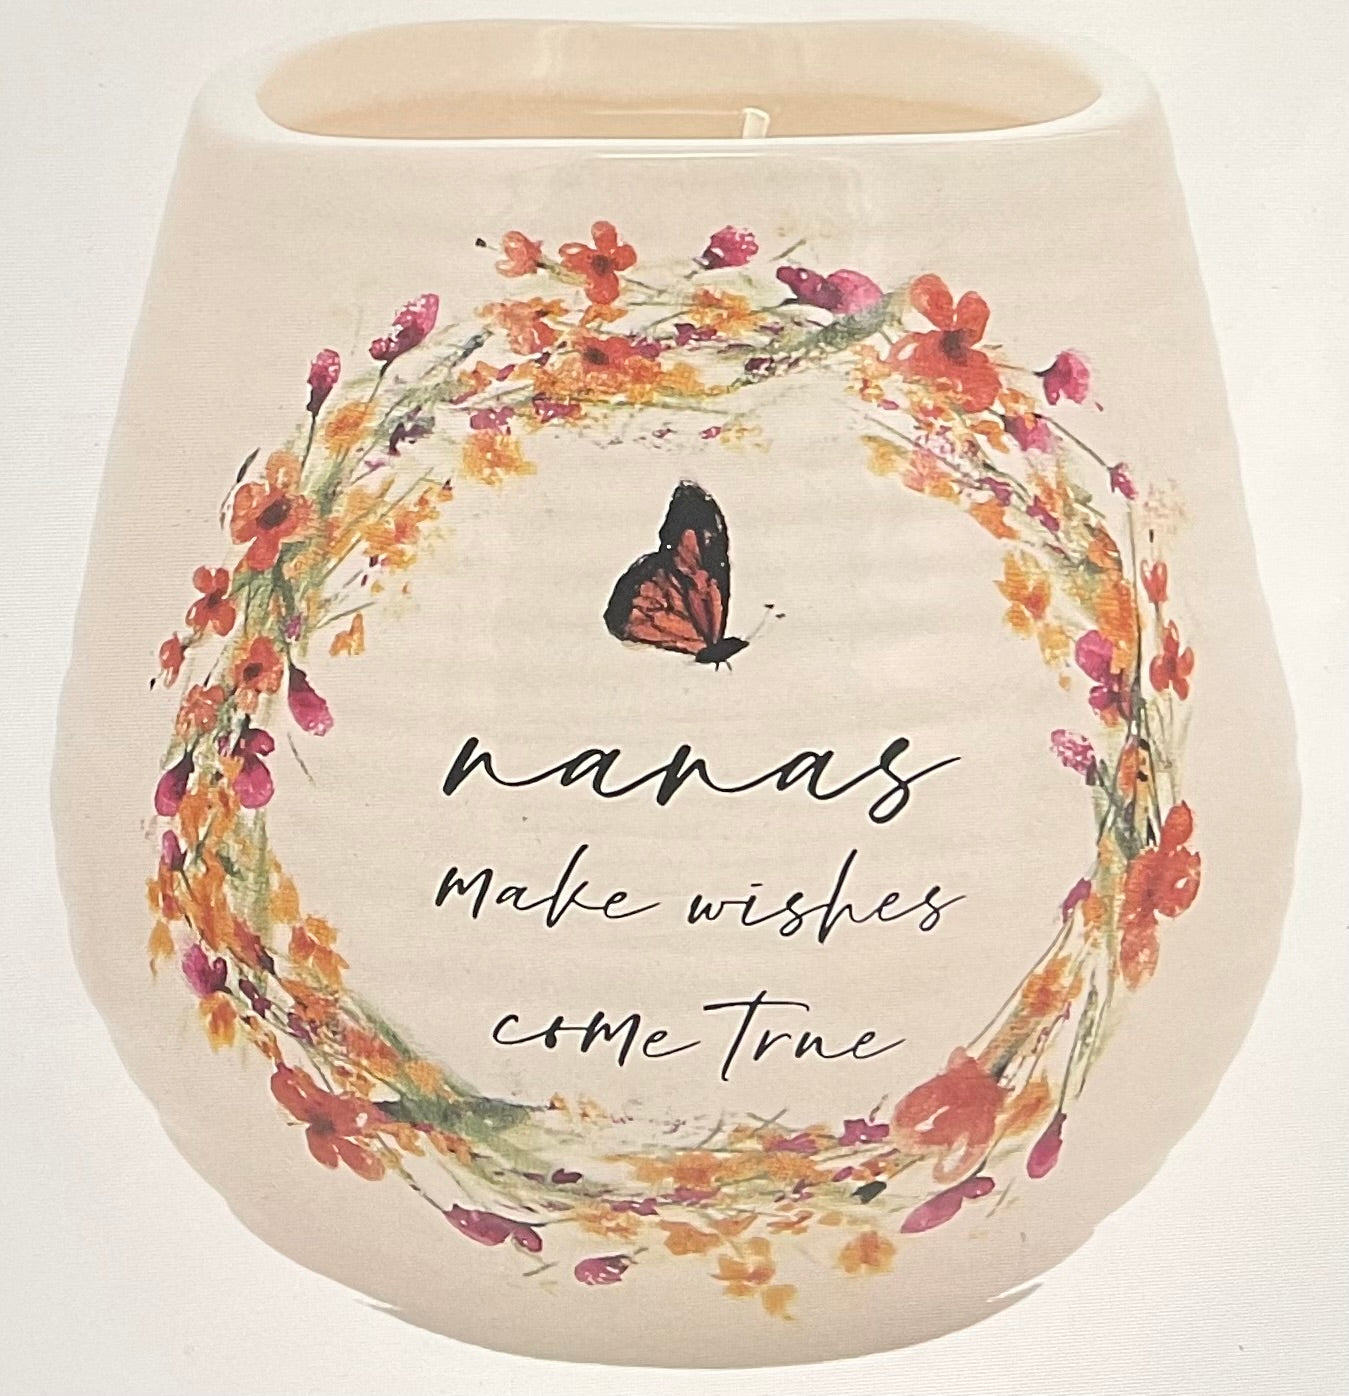 Nanas - 8 oz - 100% Soy Wax Candle Scent: Tranquility